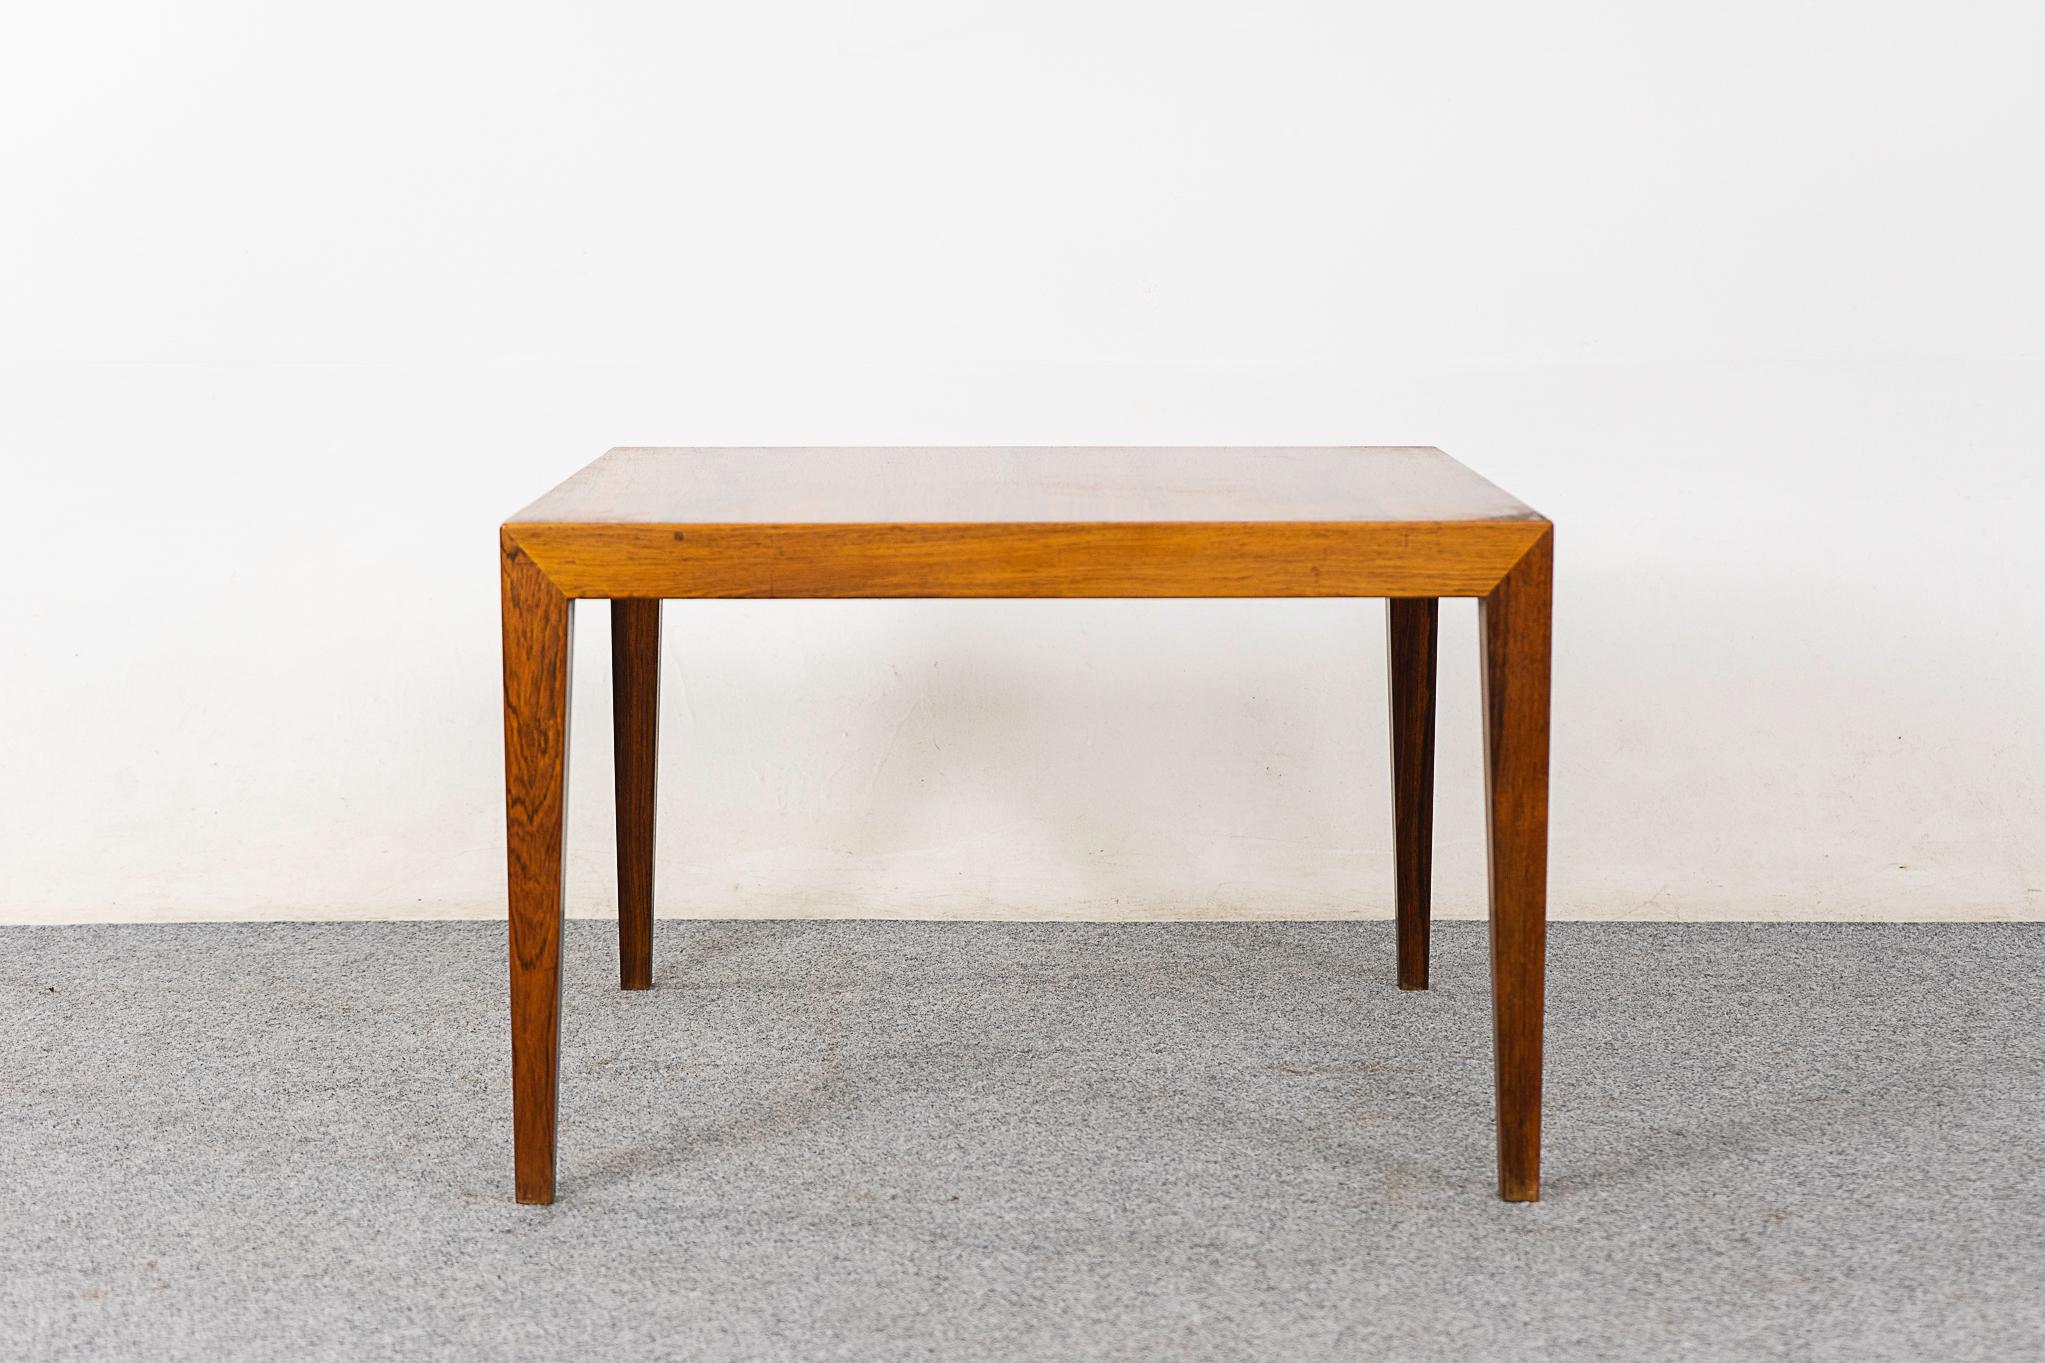 Rosewood mid-century side table by Haslev, circa 1960's. Compact, highly functional table with sleek corner joinery. Haslev's maker's mark and Danish Furniture Control stamp intact. 

Unrestored item, some marks consistent with age. 